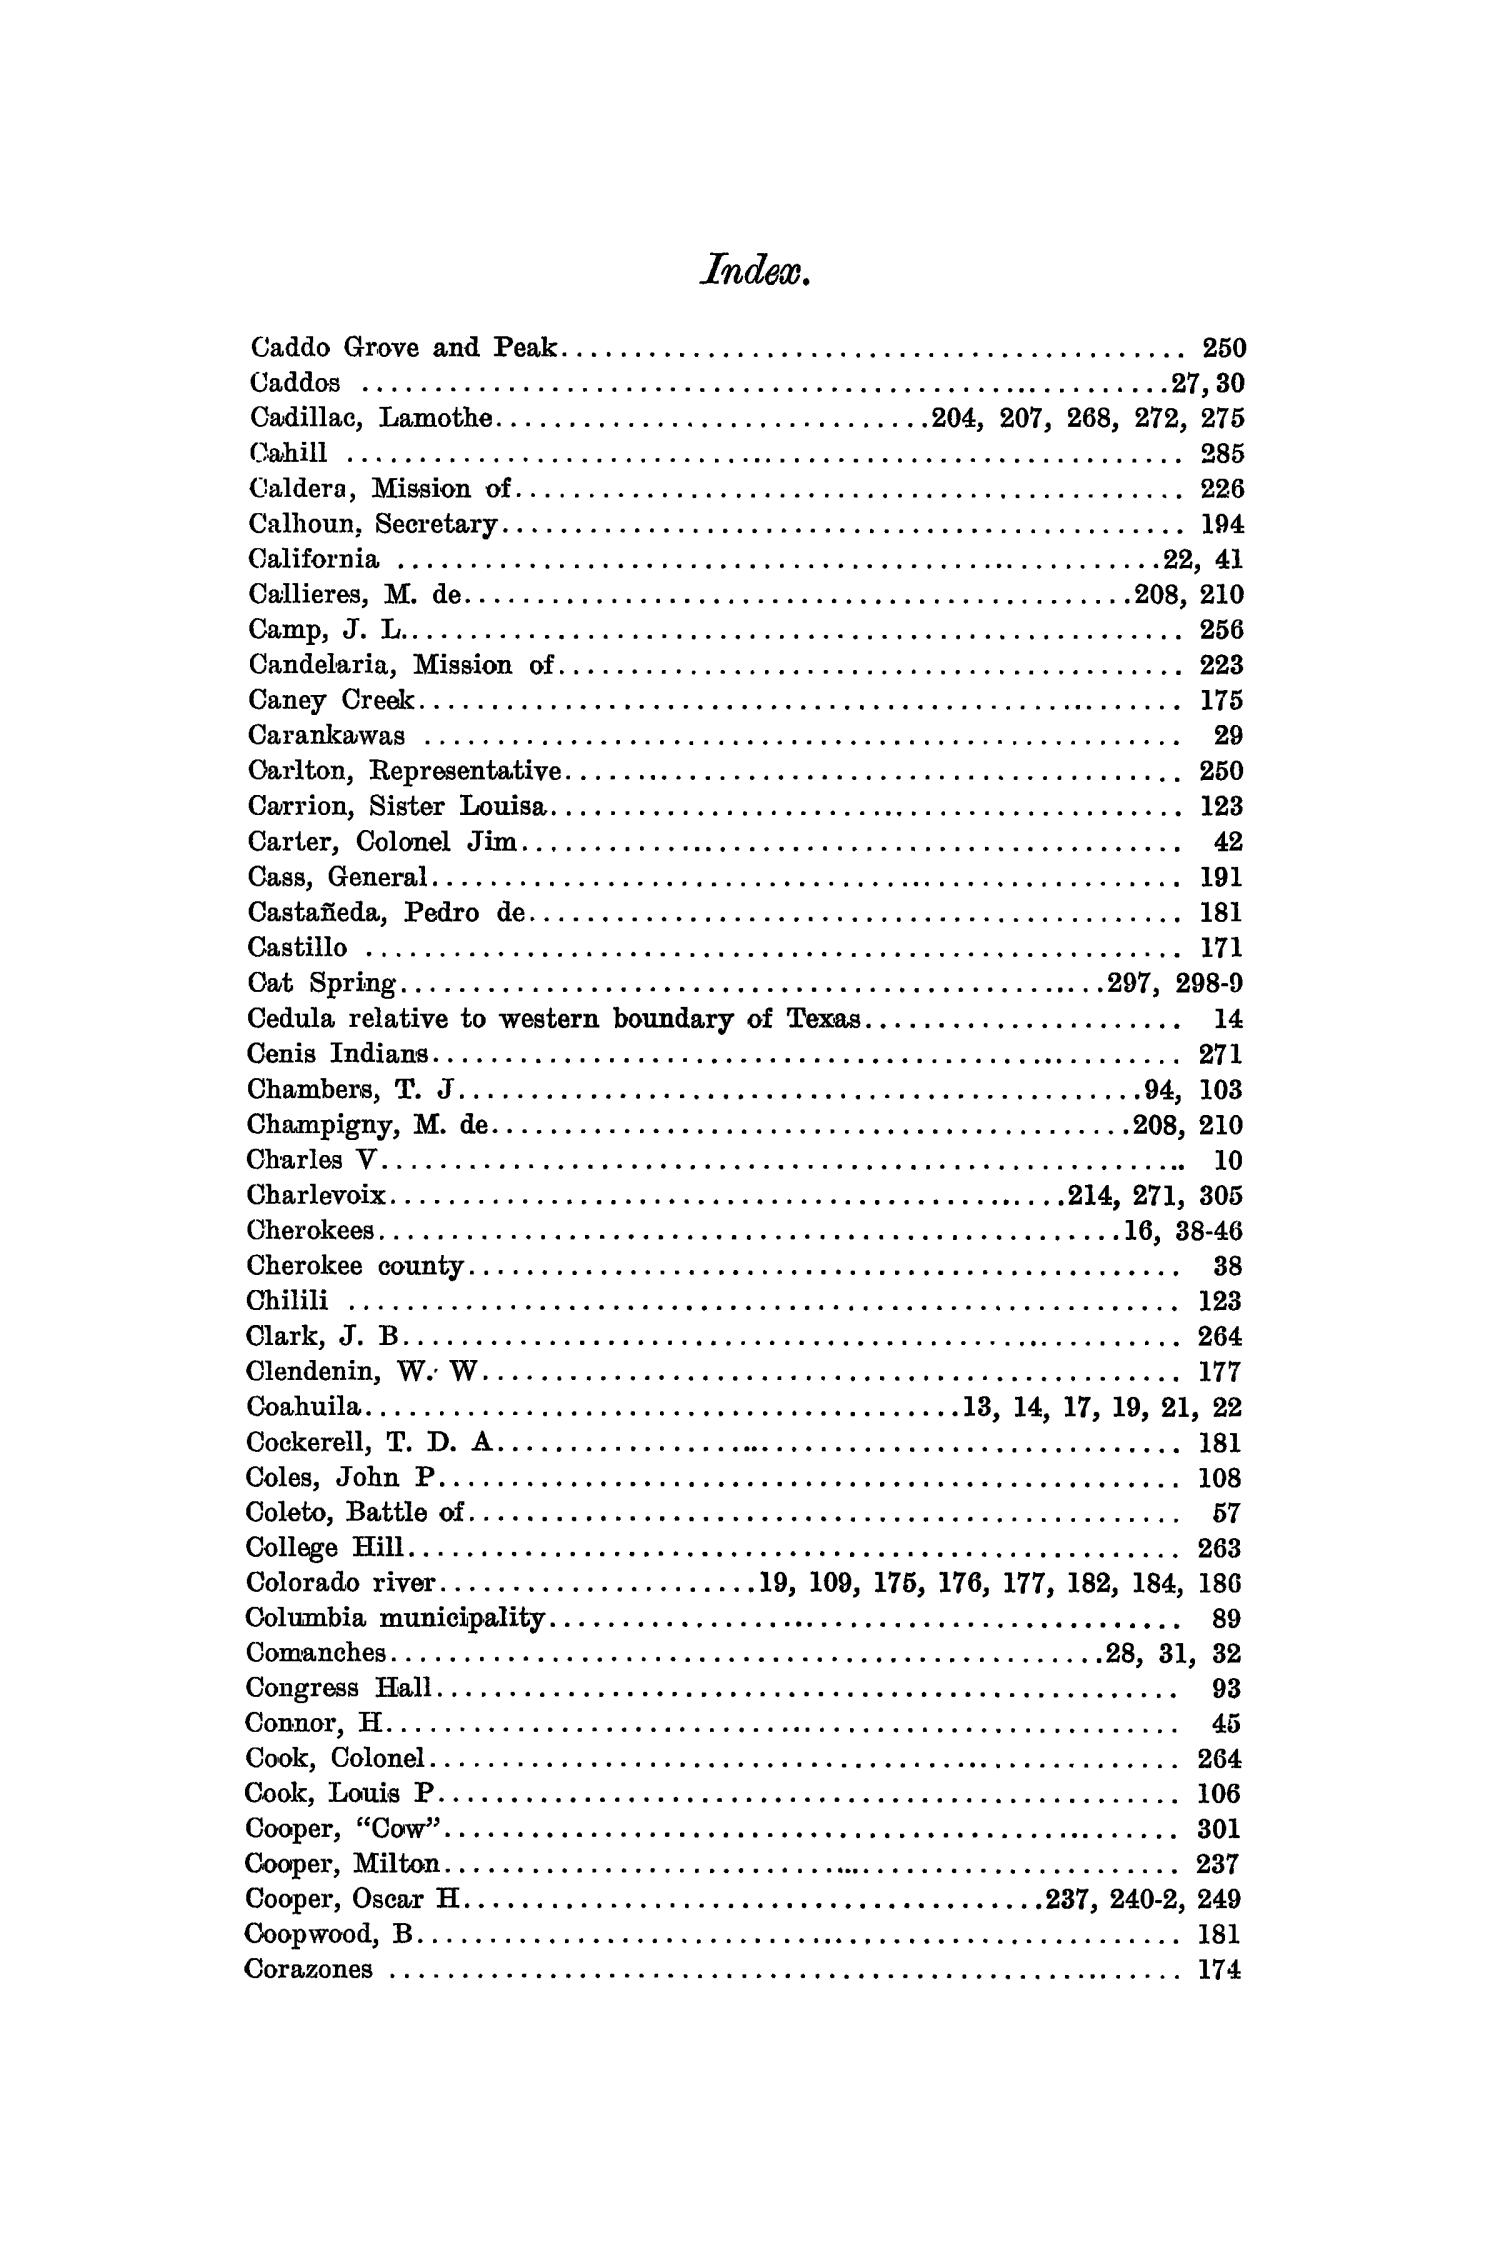 The Quarterly of the Texas State Historical Association, Volume 1, July 1897 - April, 1898
                                                
                                                    323
                                                